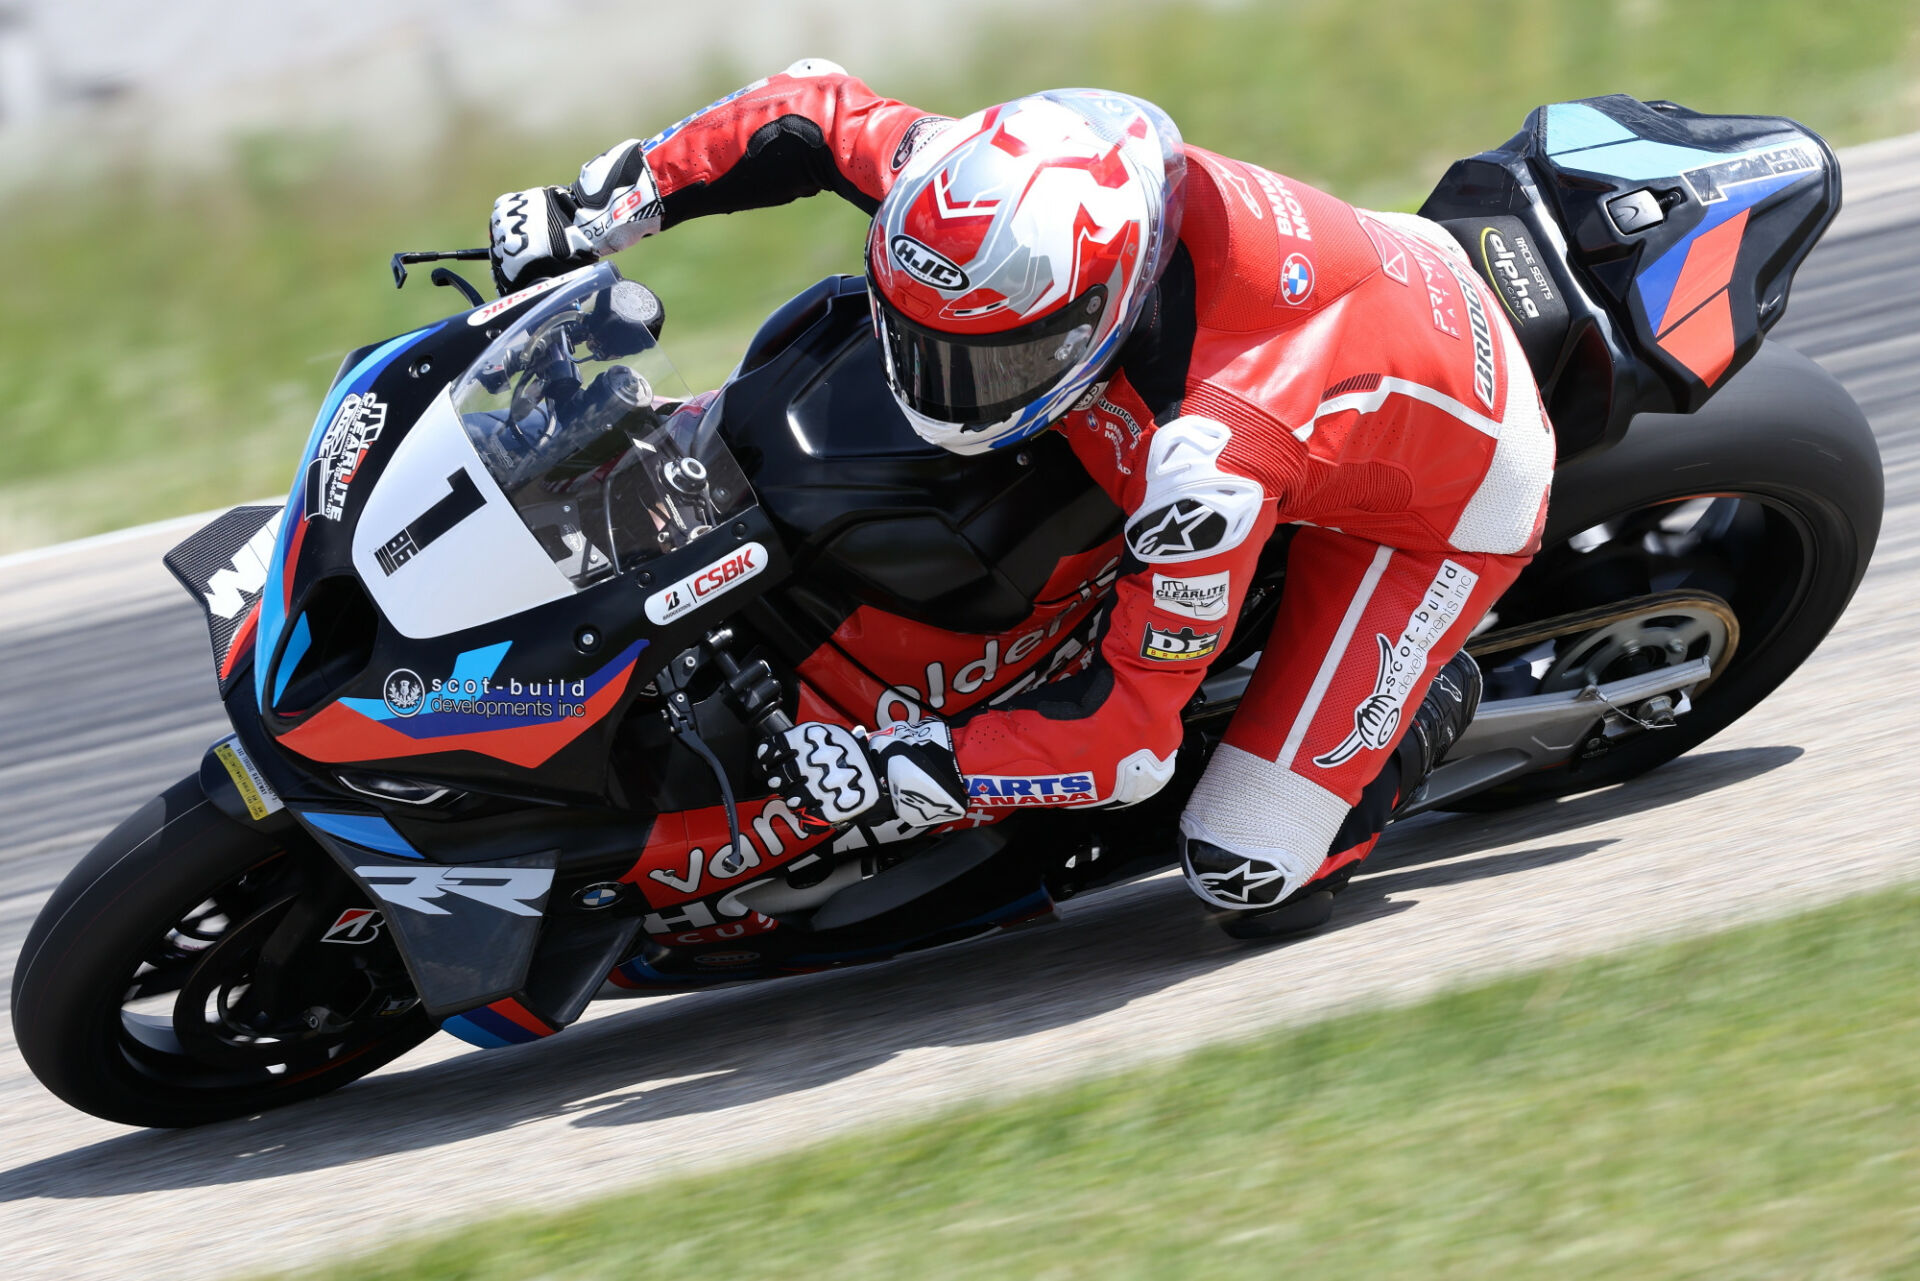 Ben Young (1) topped qualifying Friday, setting a new RAD Torque Raceway lap record on his way to pole position for CSBK round three in Edmonton. Photo by Rob O’Brien, courtesy CSBK.